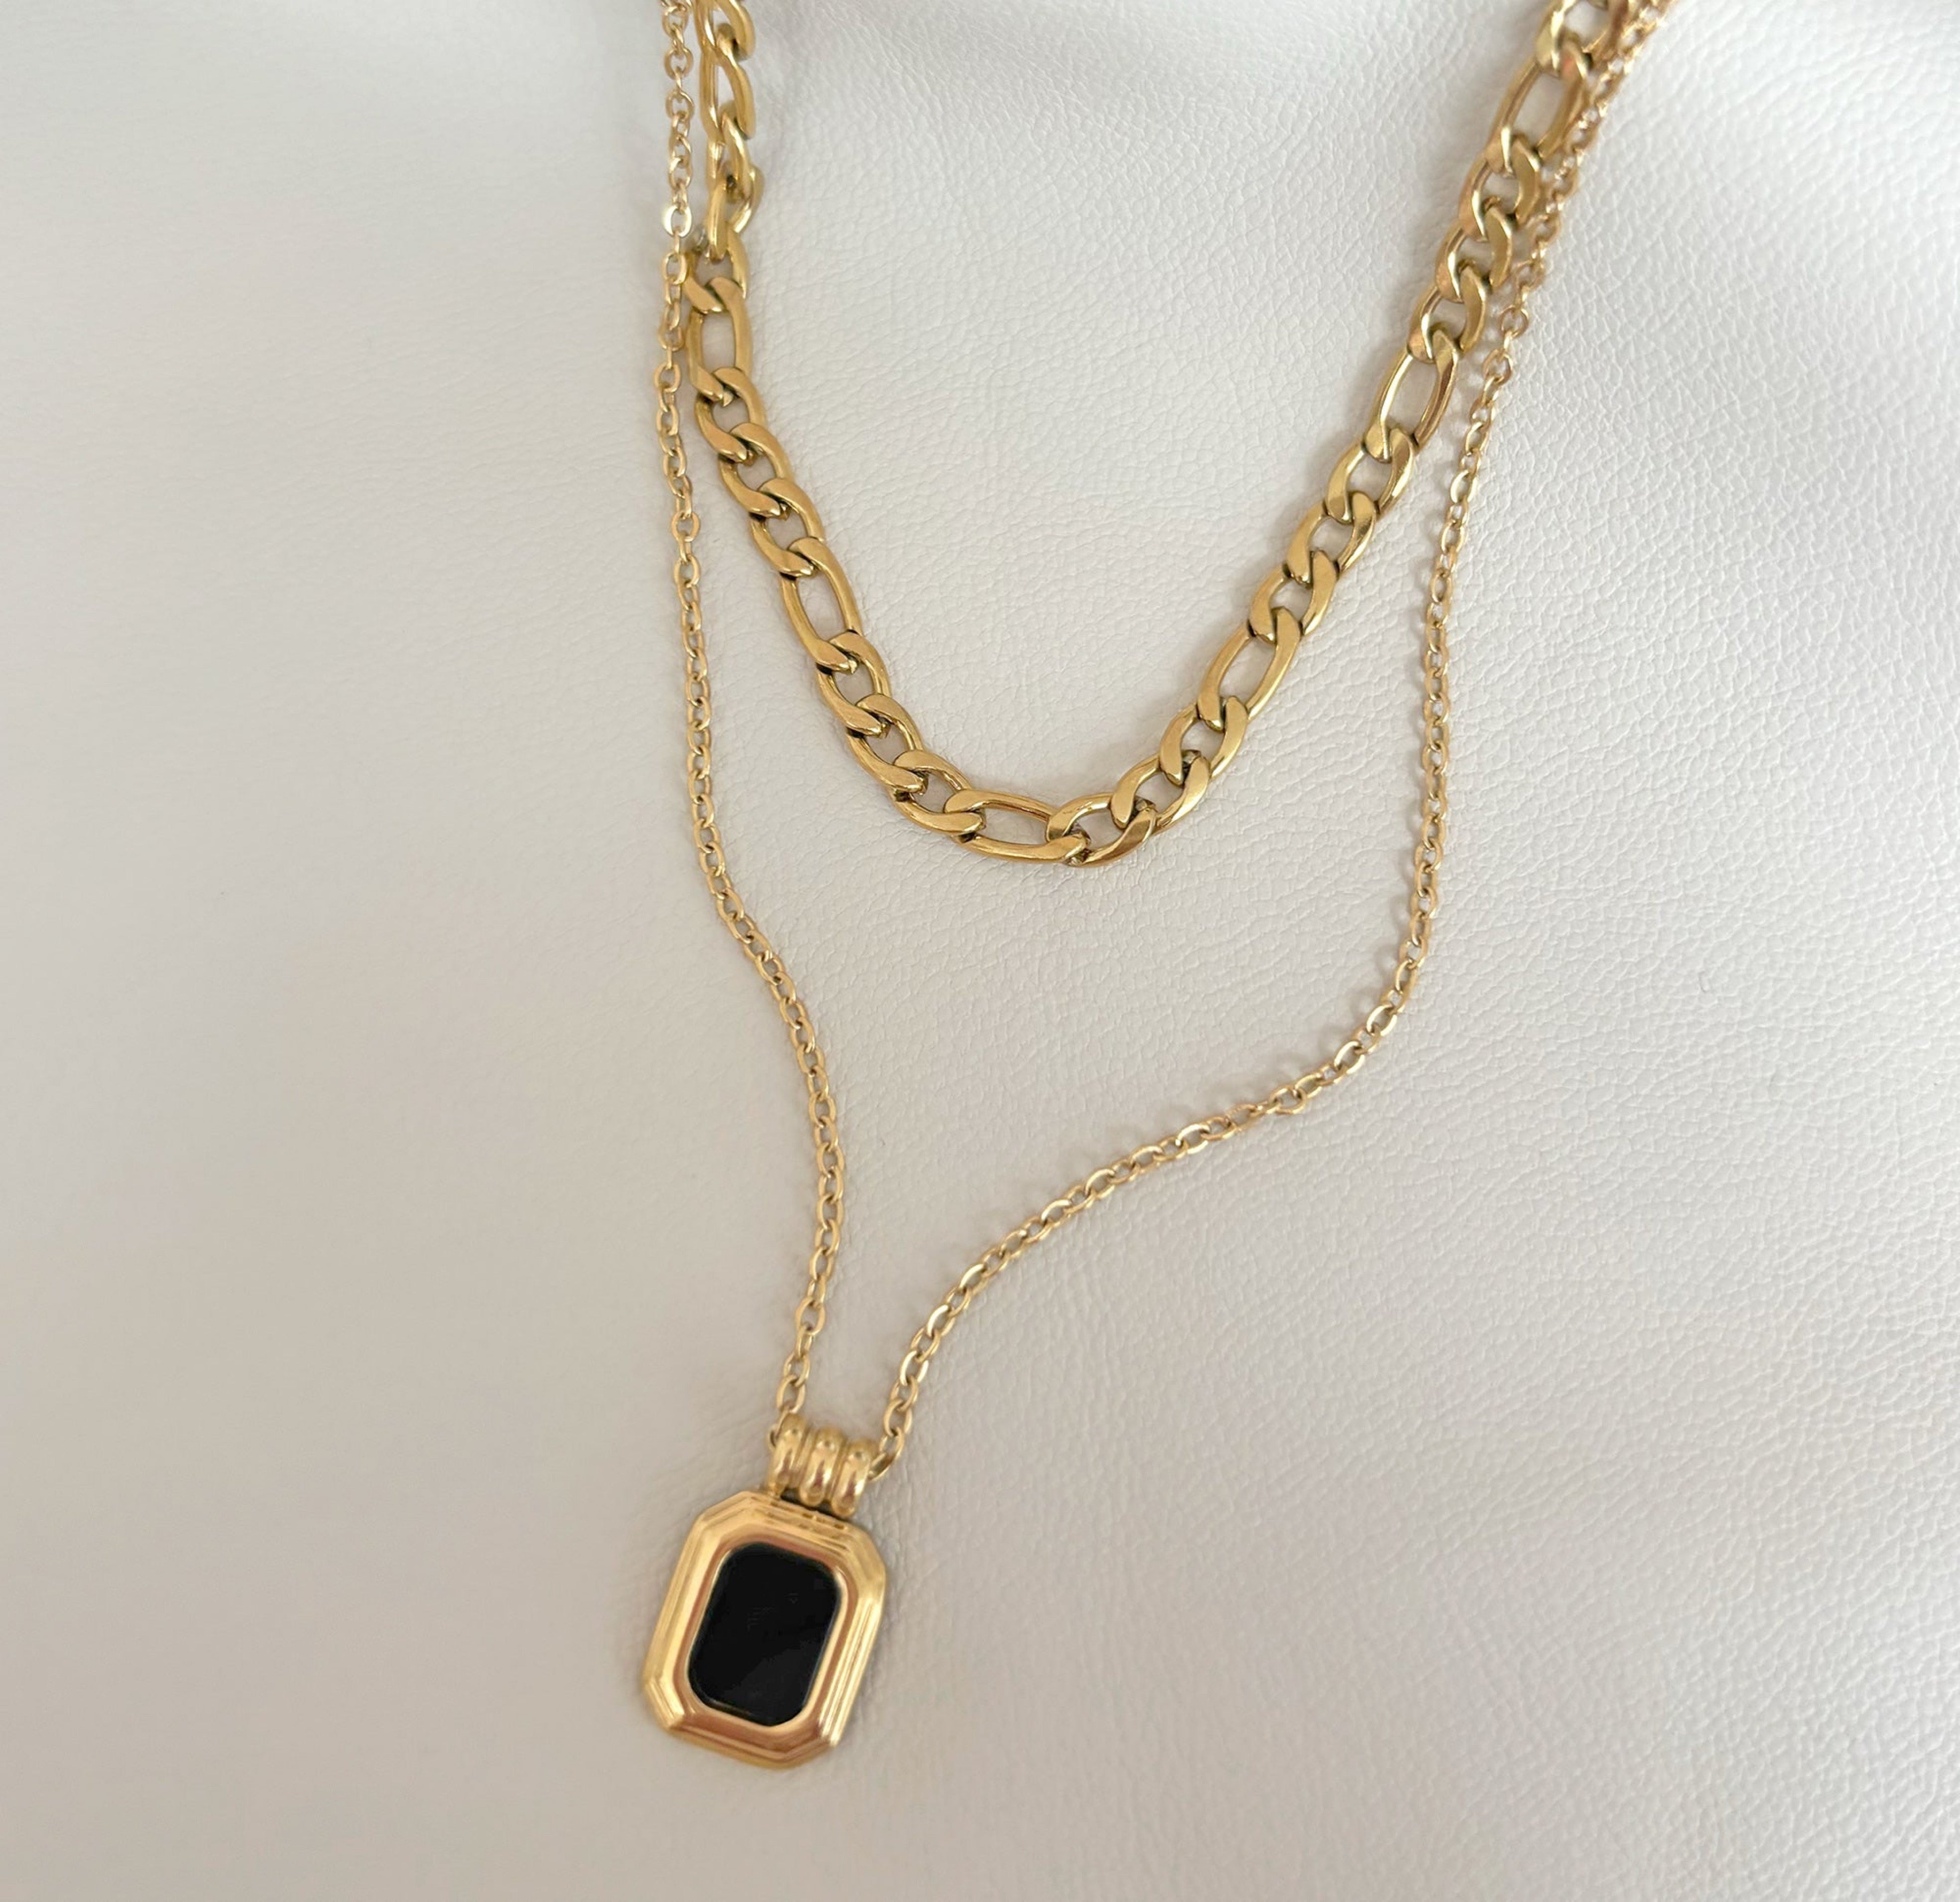 gold duo stack black pendant necklace water resistant jewelry